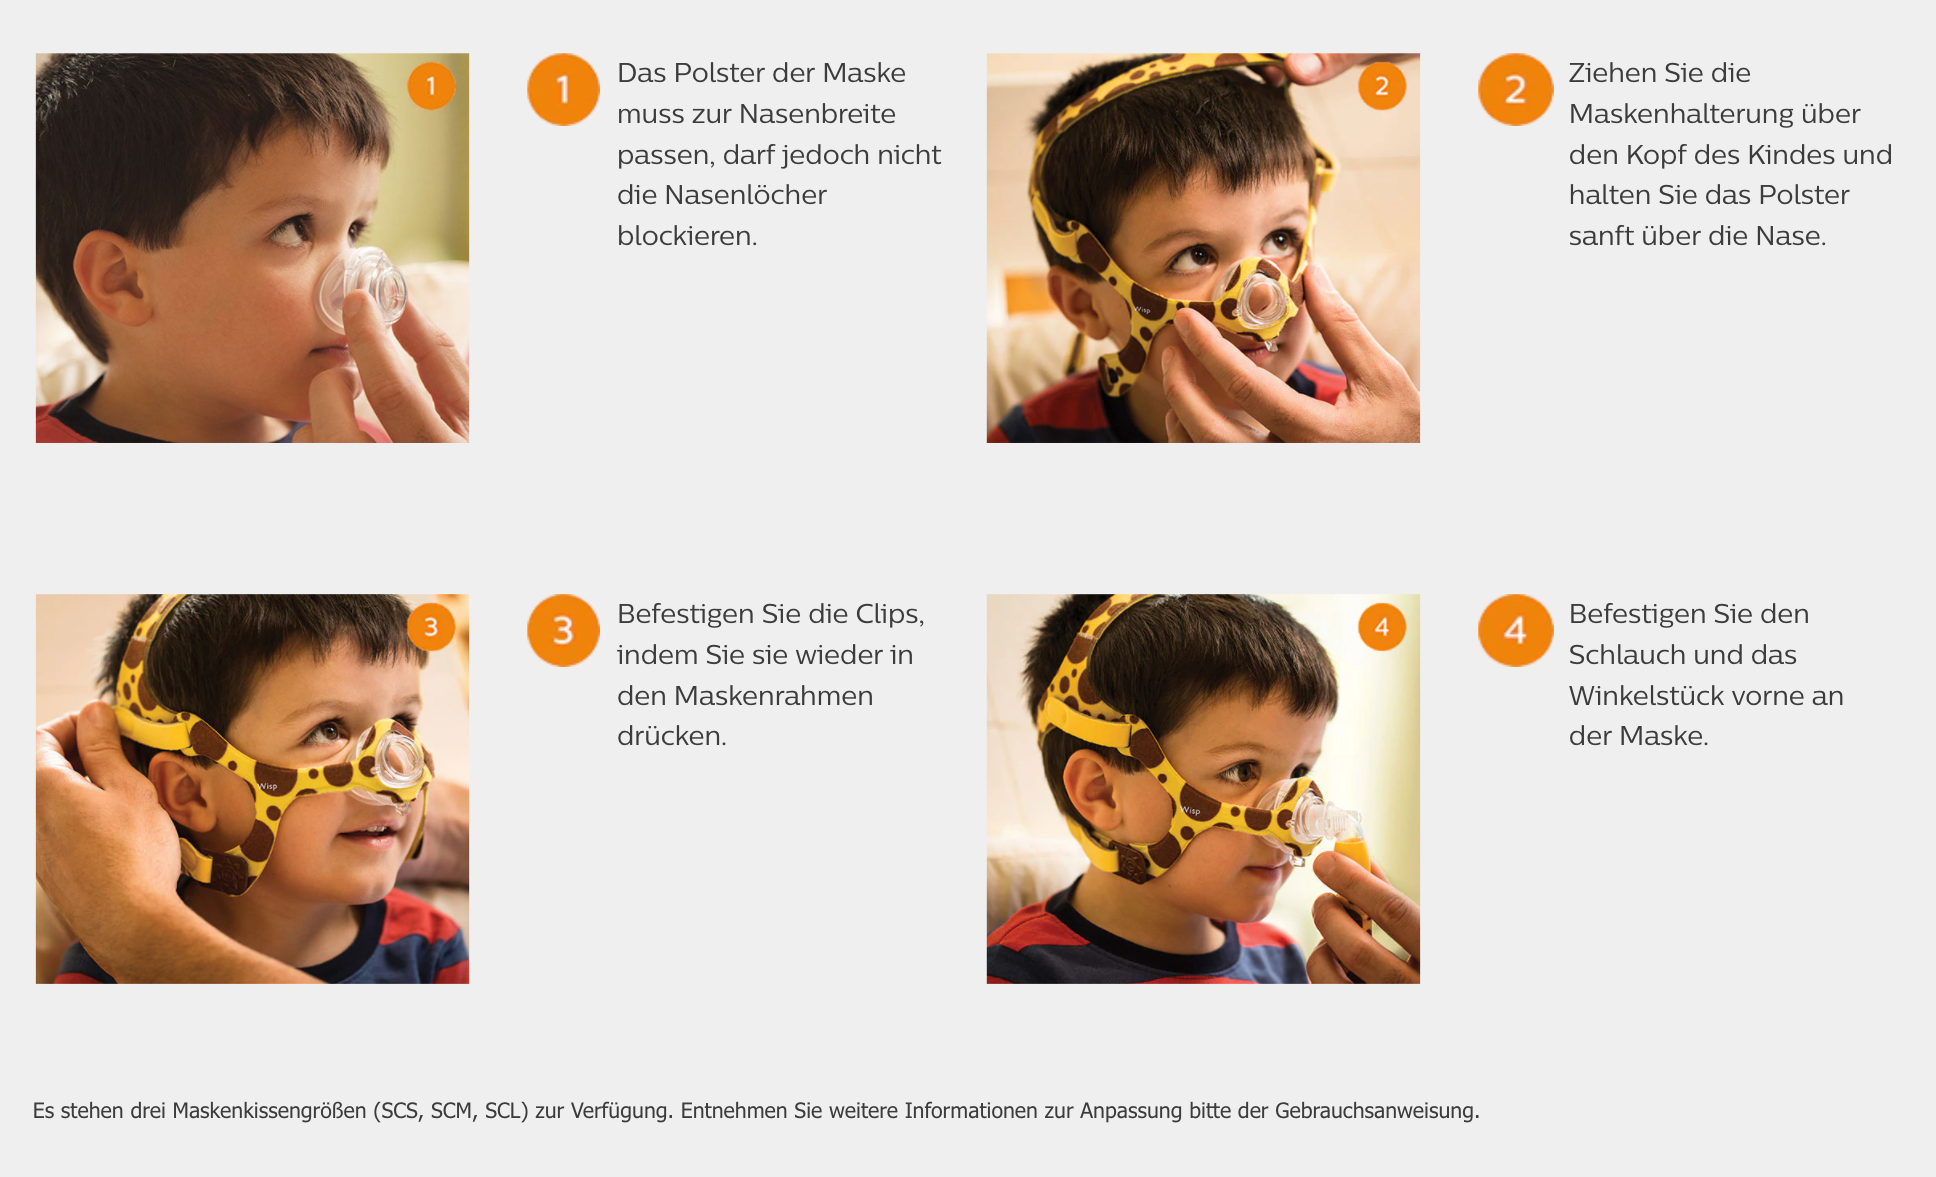 Guide to fitting the Wisp pediatric nasal mask